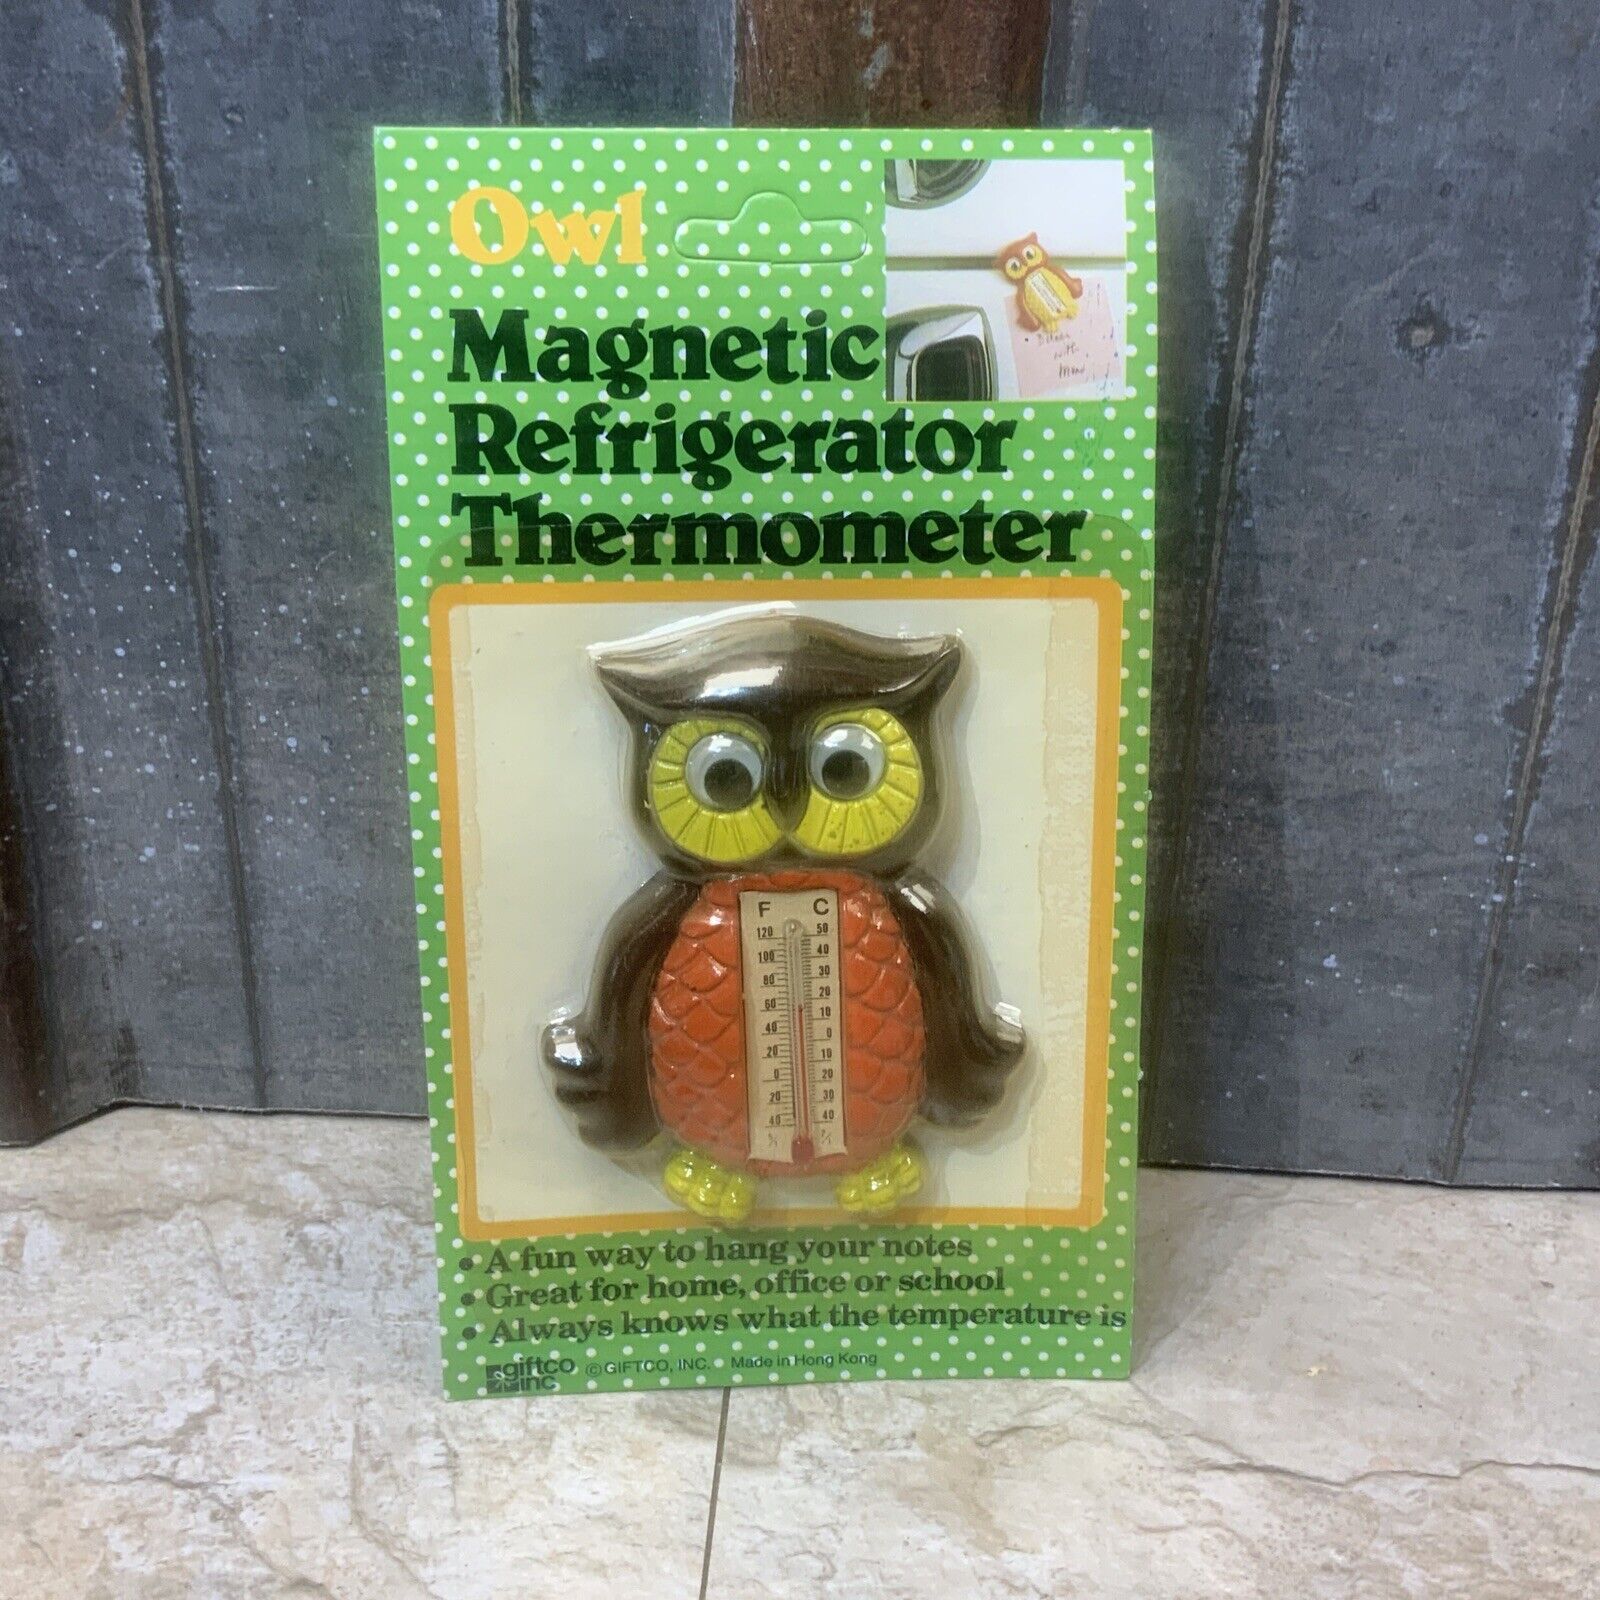 New Vintage Owl Refrigerator Magnet Thermometer